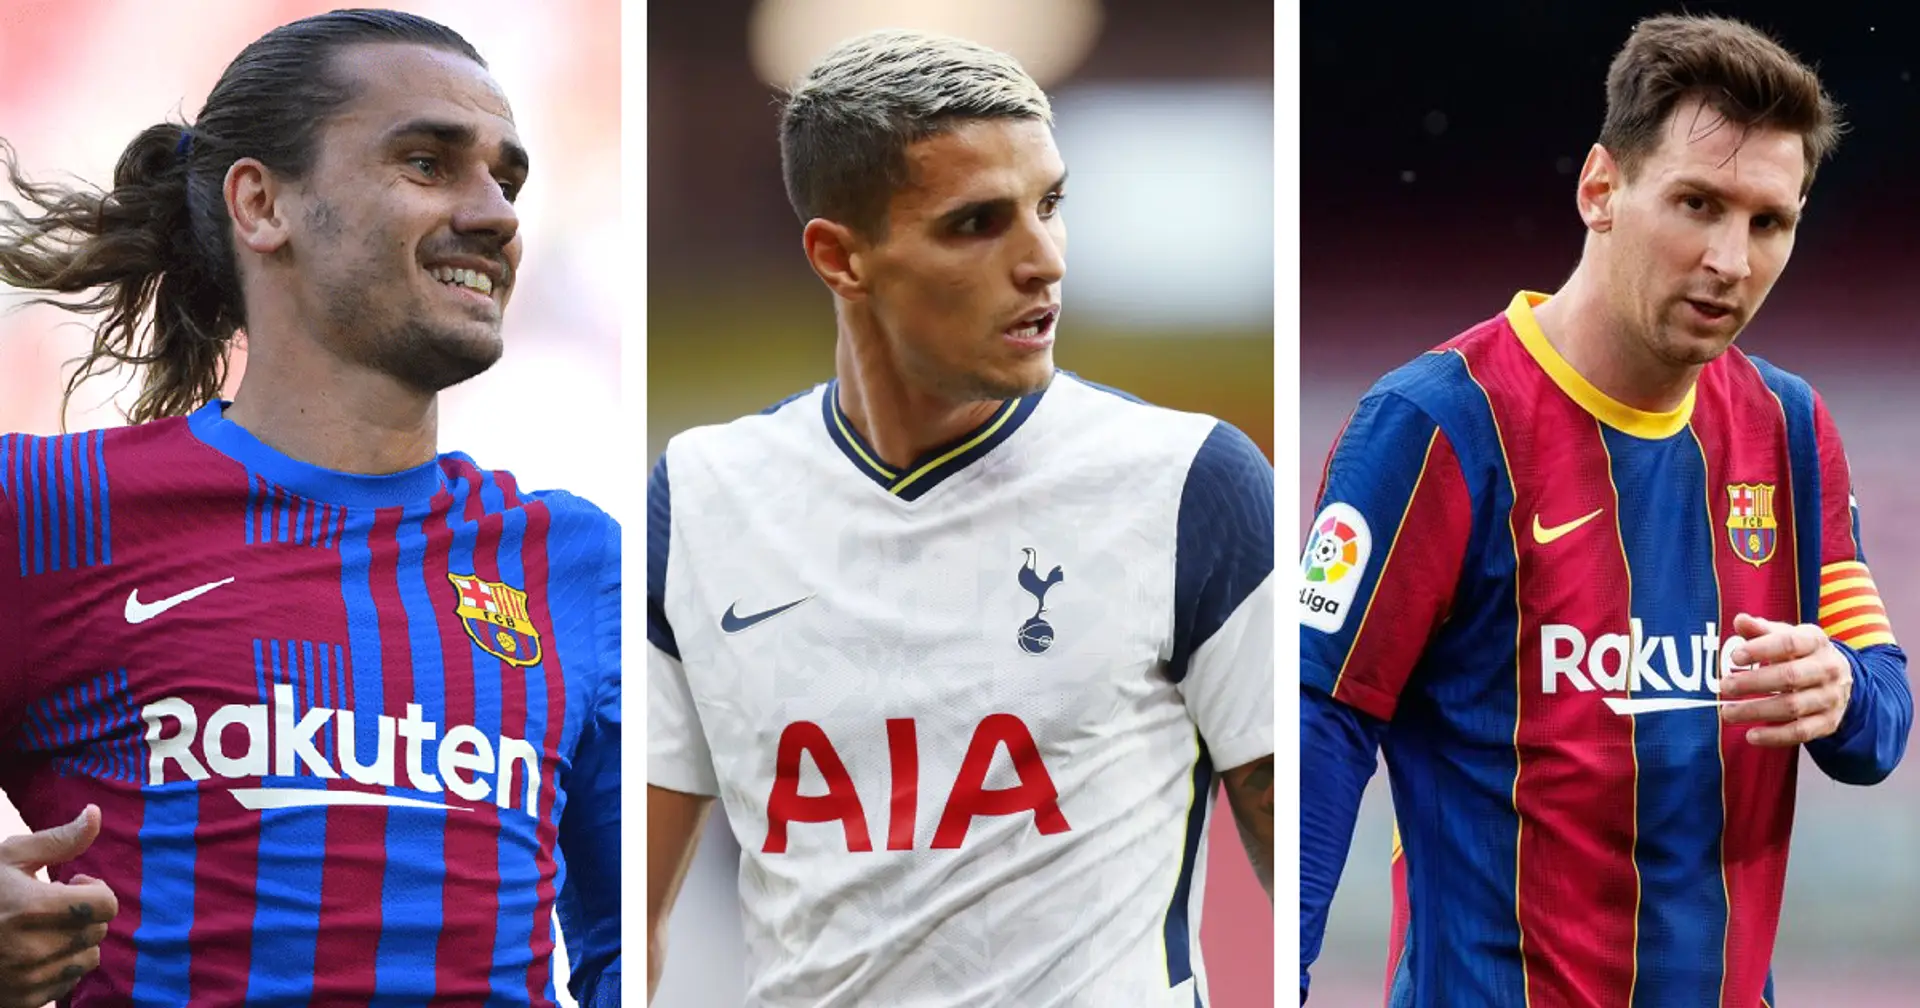 Griezmann to Atletico, Lamela to Sevilla & more: 22 completed, 8 expected big moves for Real Madrid rivals this summer